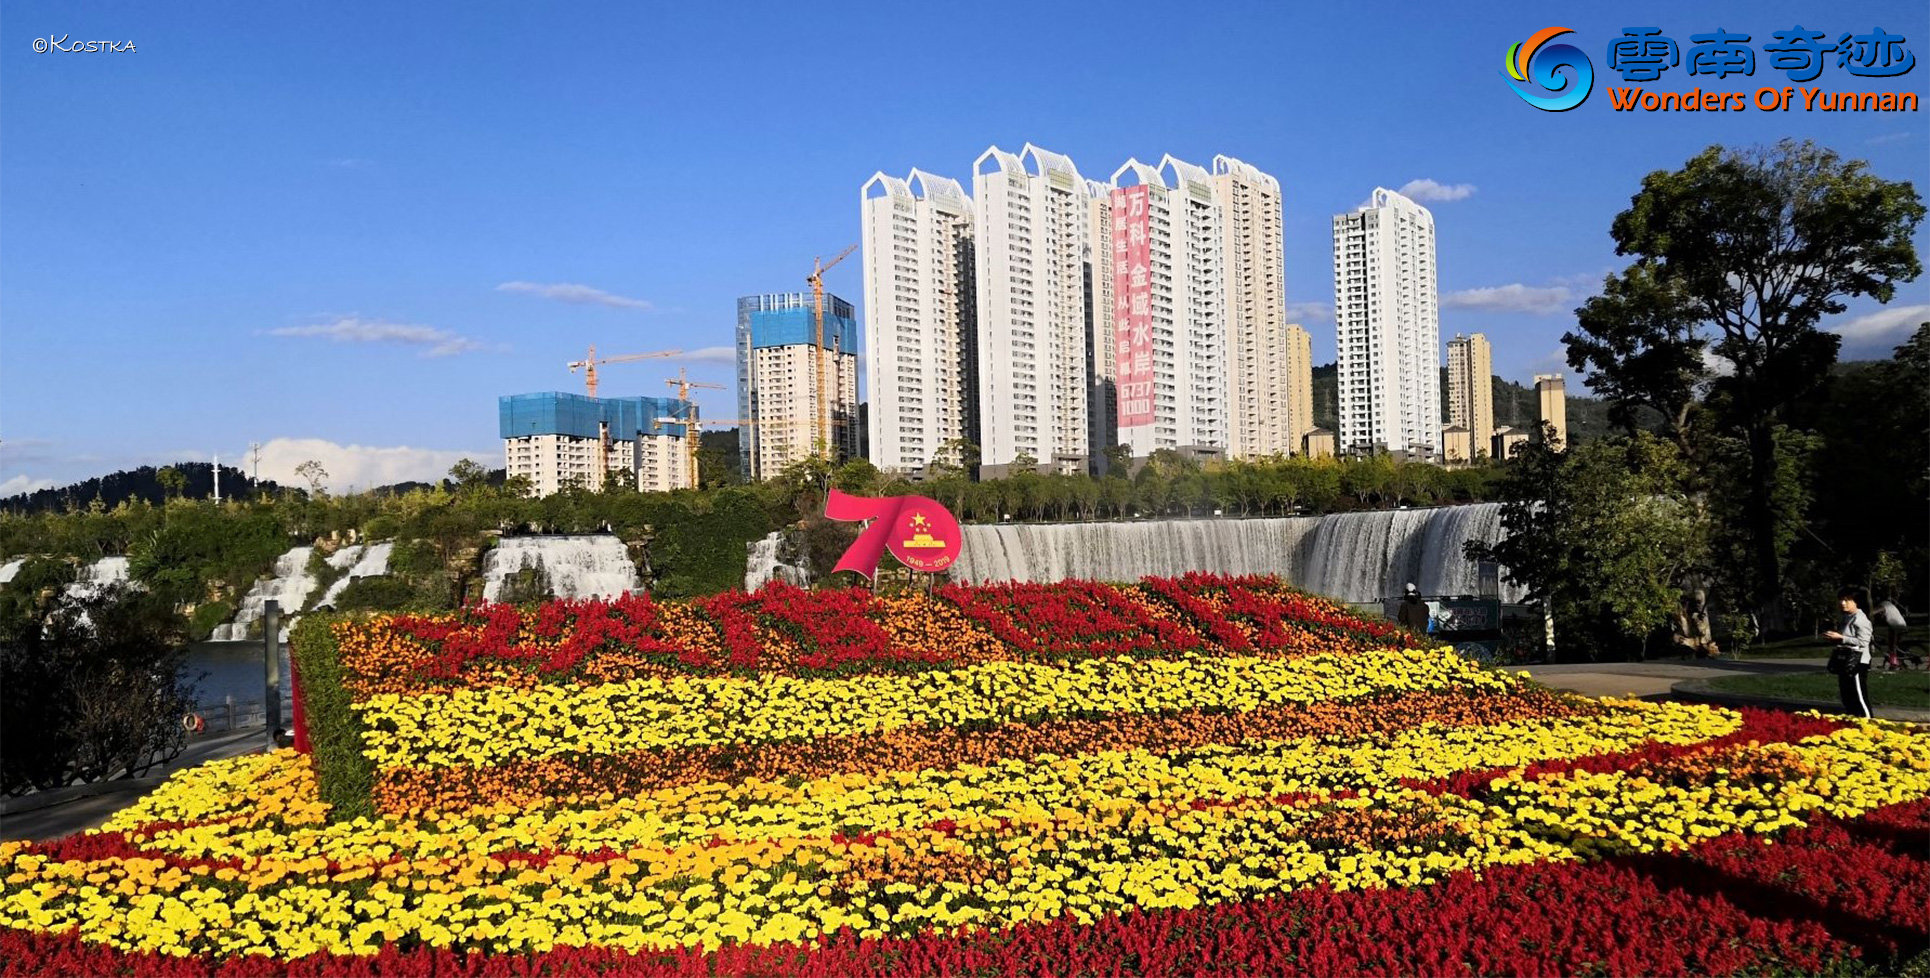 Flowerbed with beautiful yellow and red flowers on the upper platform in front of the waterfall for the 70 anniversary of China at the main entrance to the Park at the south-west